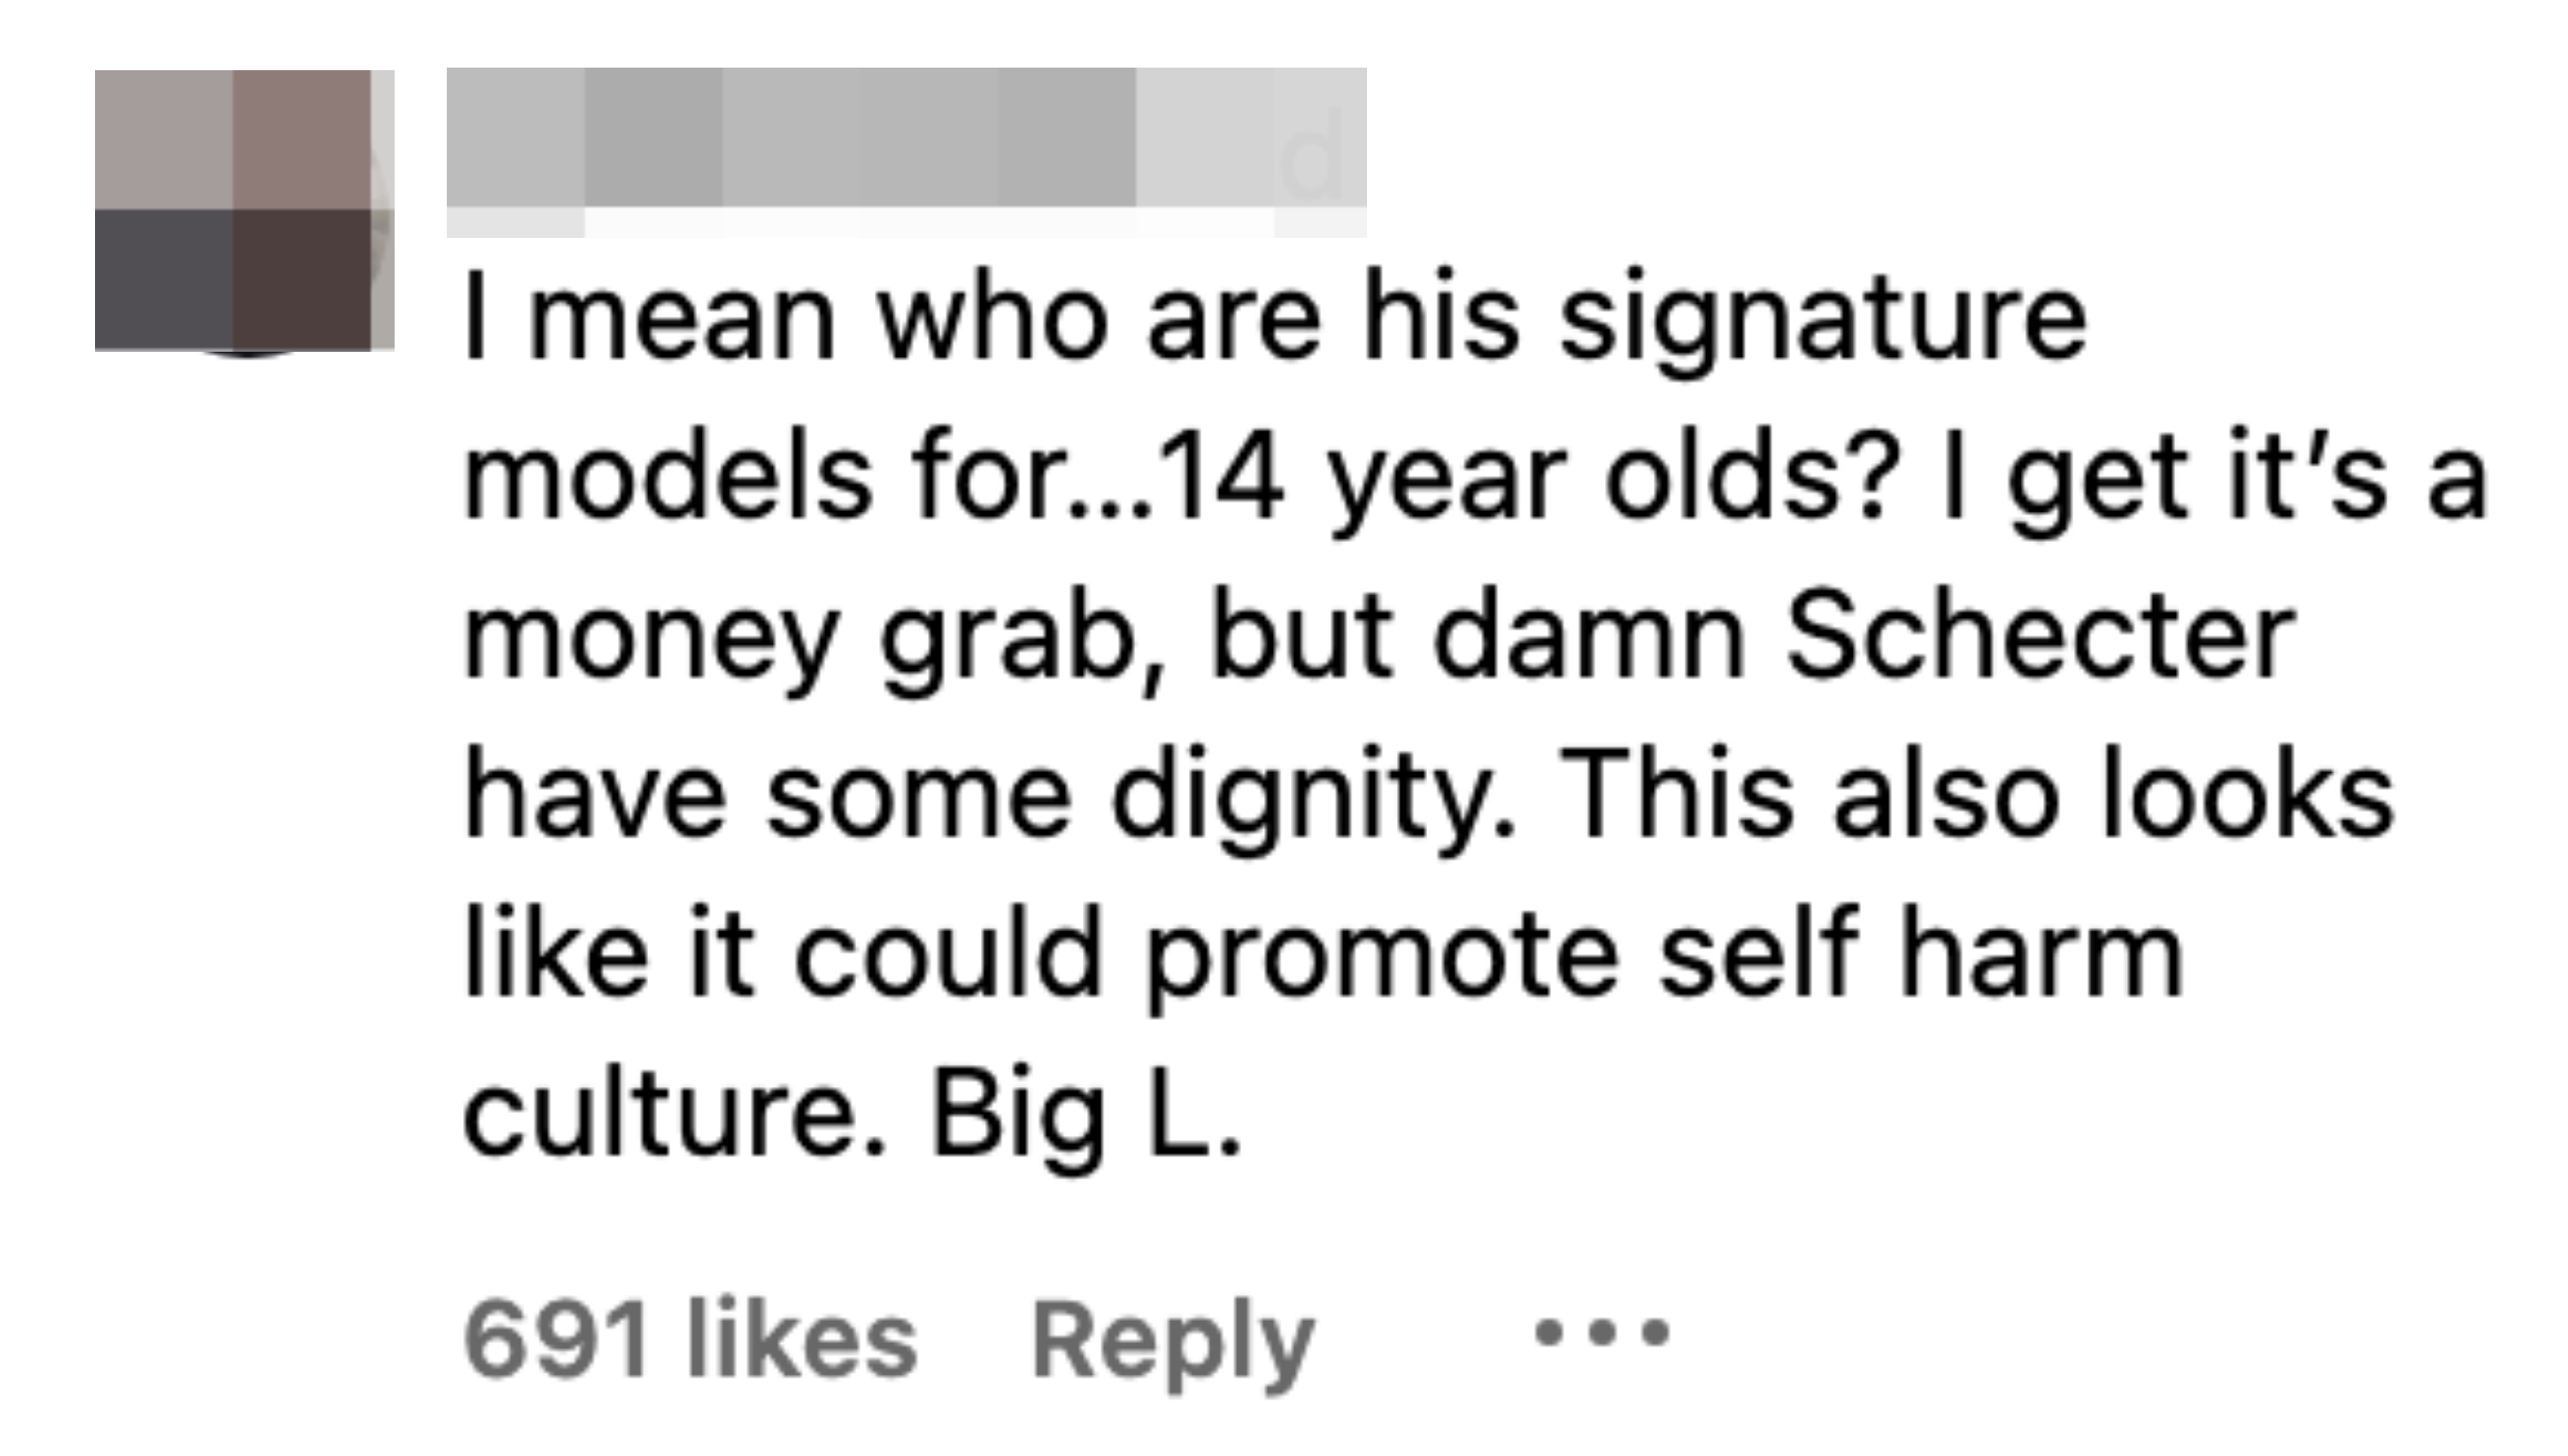 i mean who are his sigaiture models for... 14 year olds?